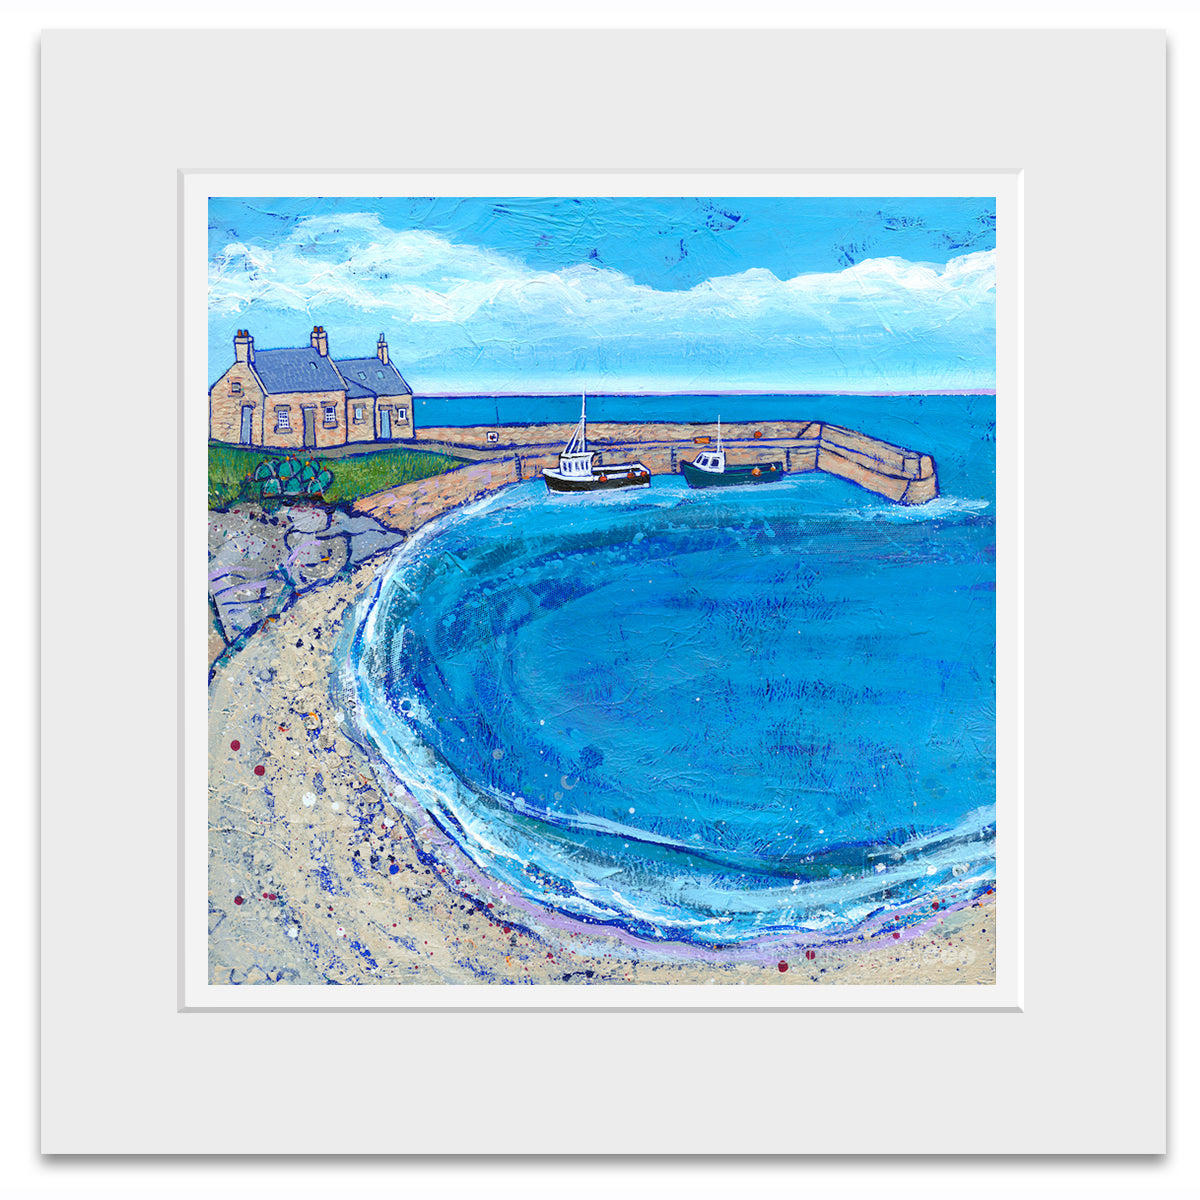 A mounted print of Cove on the east coast of Scotland.